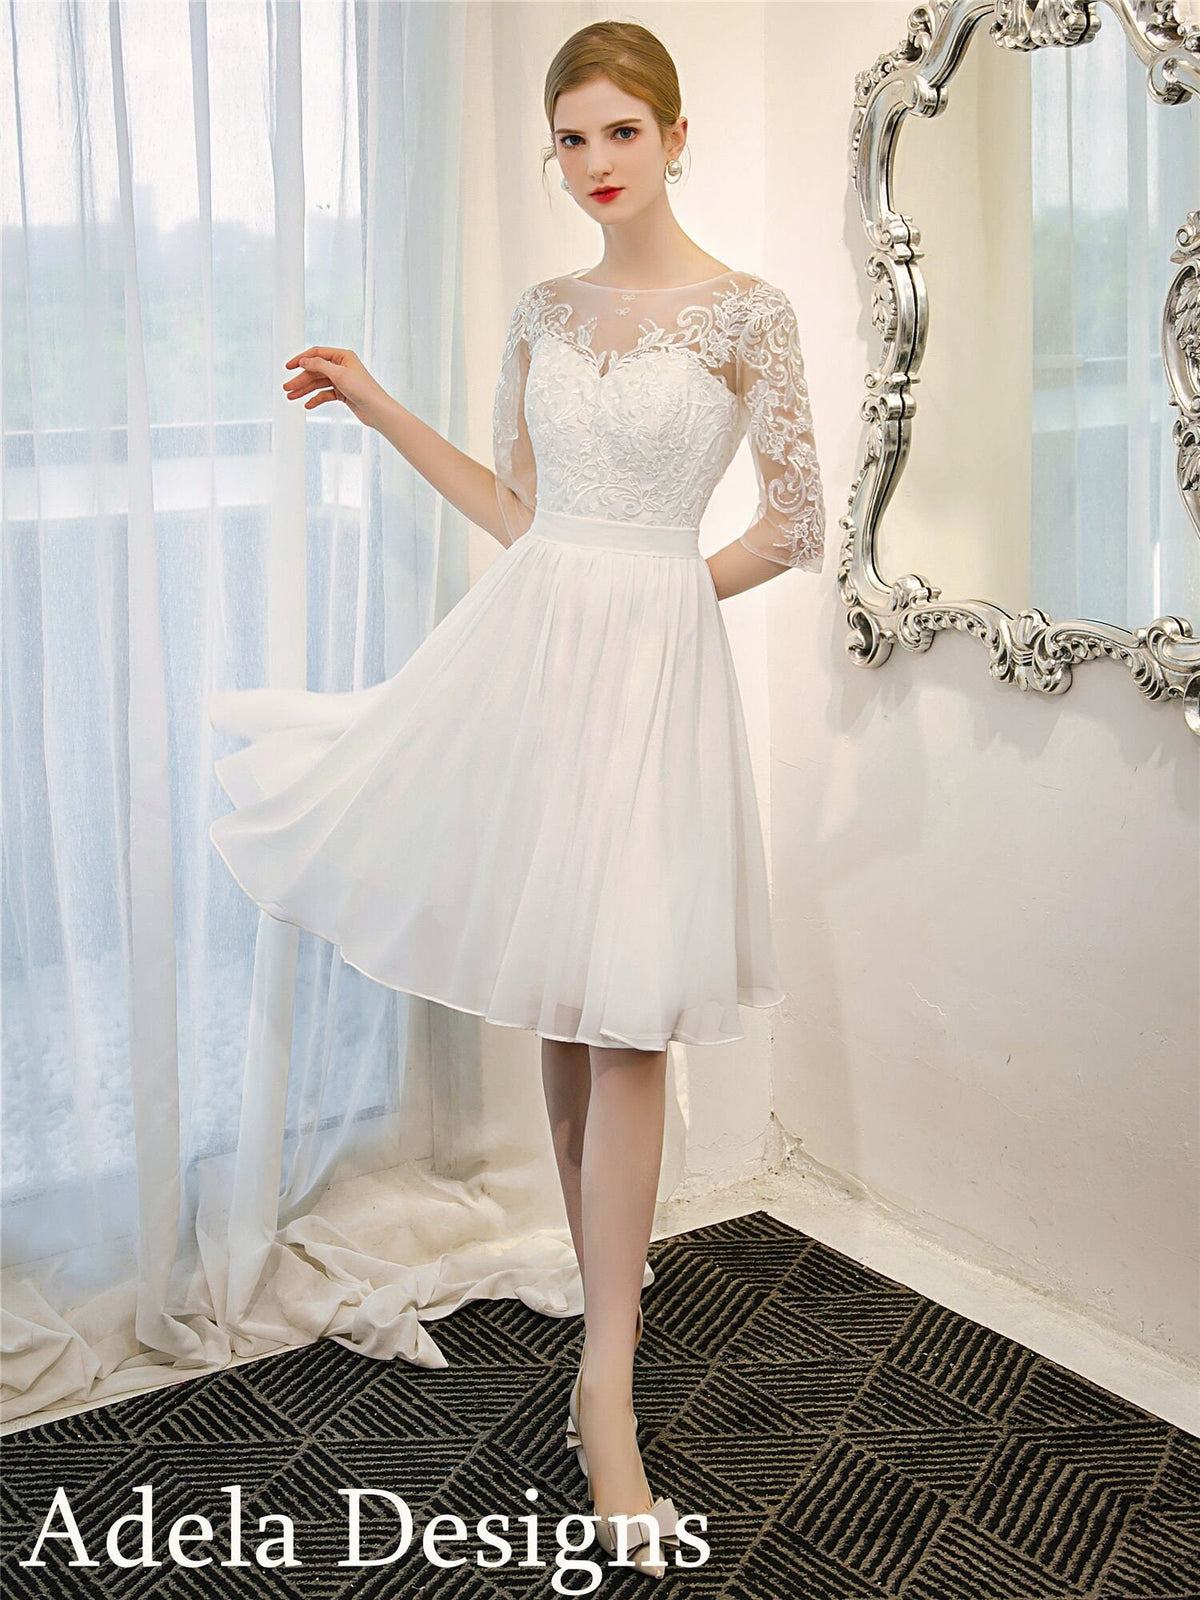 Vintage Style Knee Length Chiffon Short 3/4 Sleeves Wedding Dress Bridal Gown Classic Lace Reception Dress Formal Bridal Shower